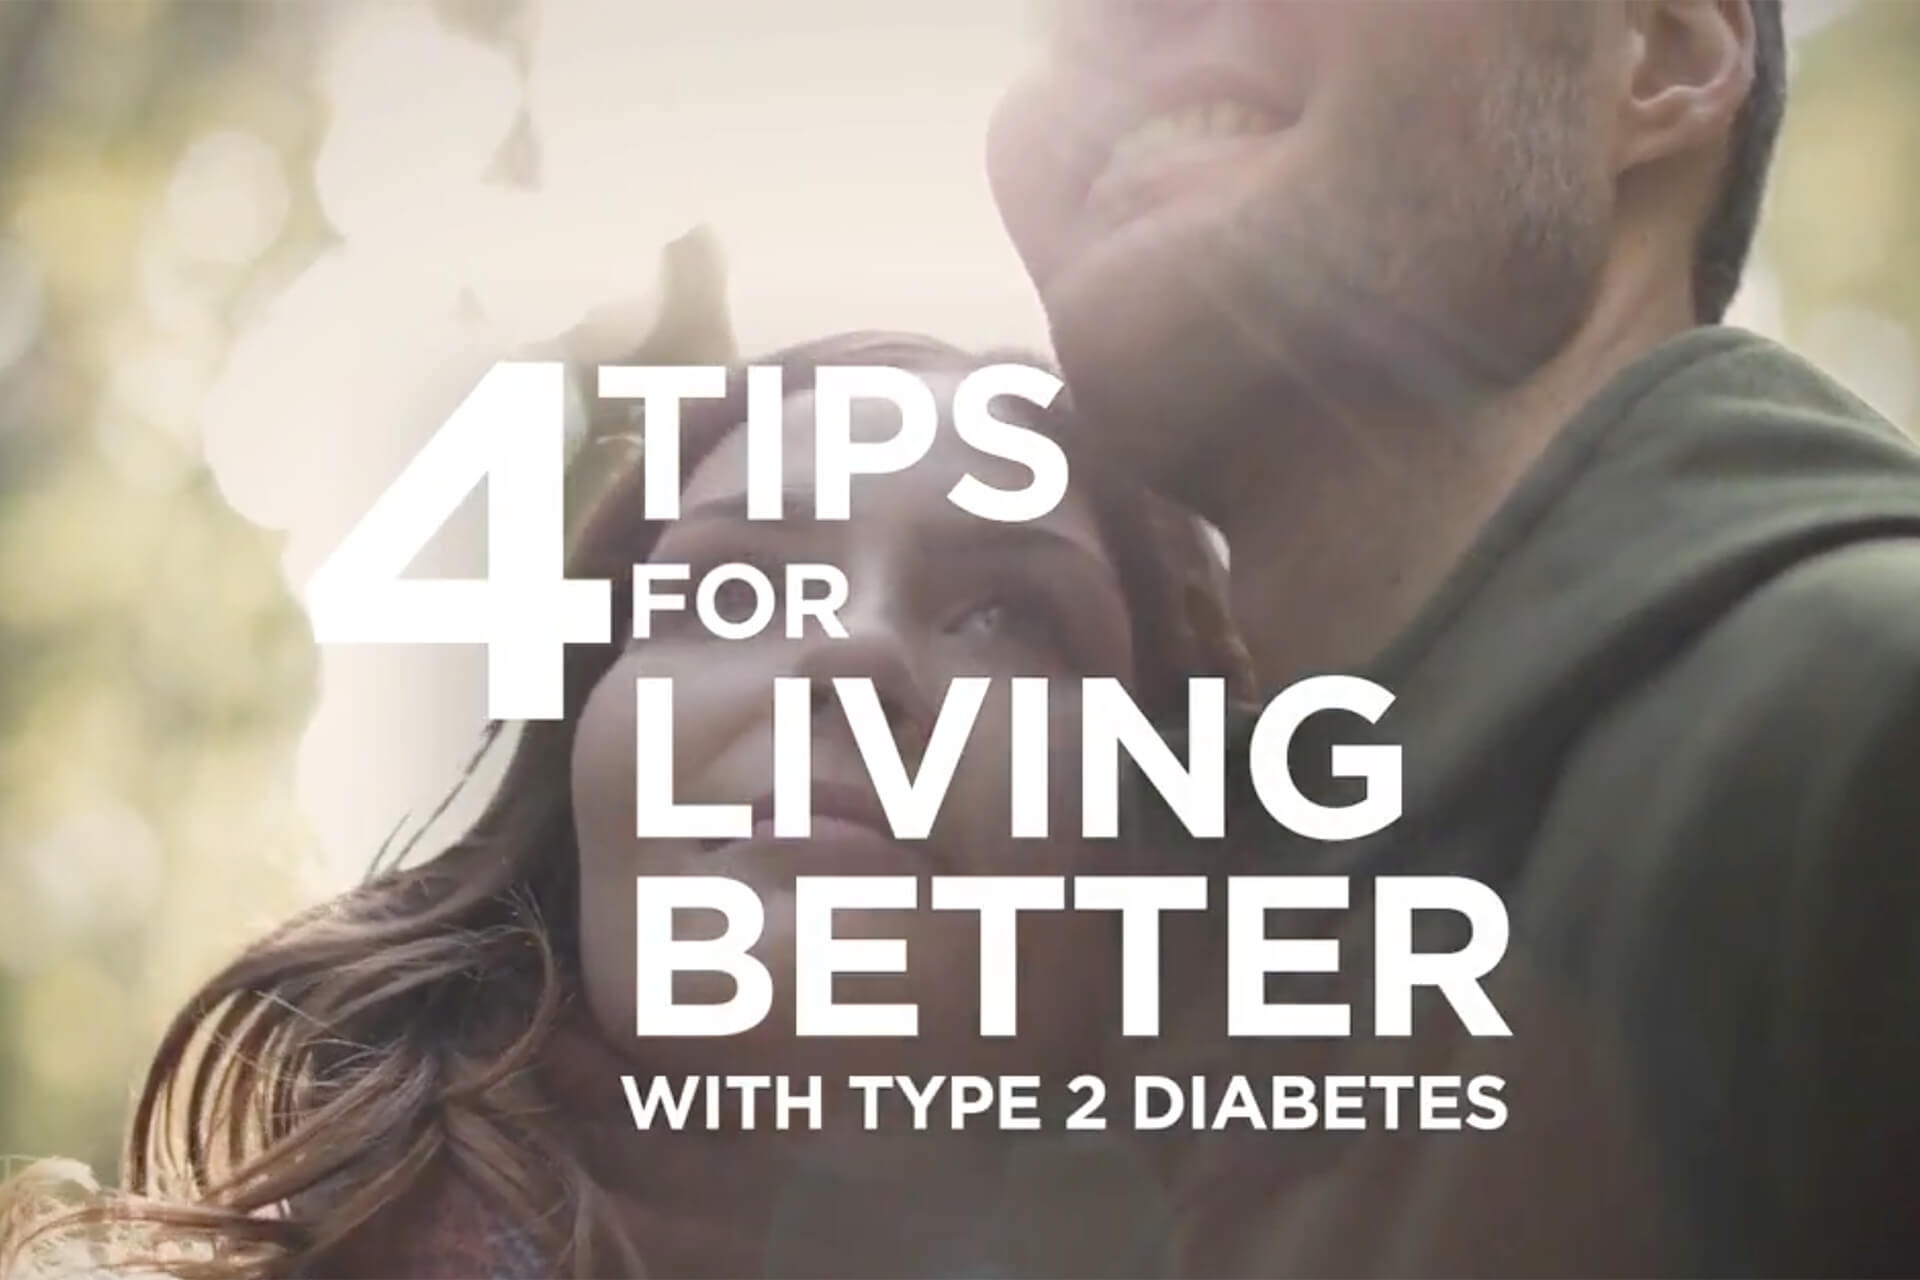 Tips for Living Better with Type 2 Diabetes